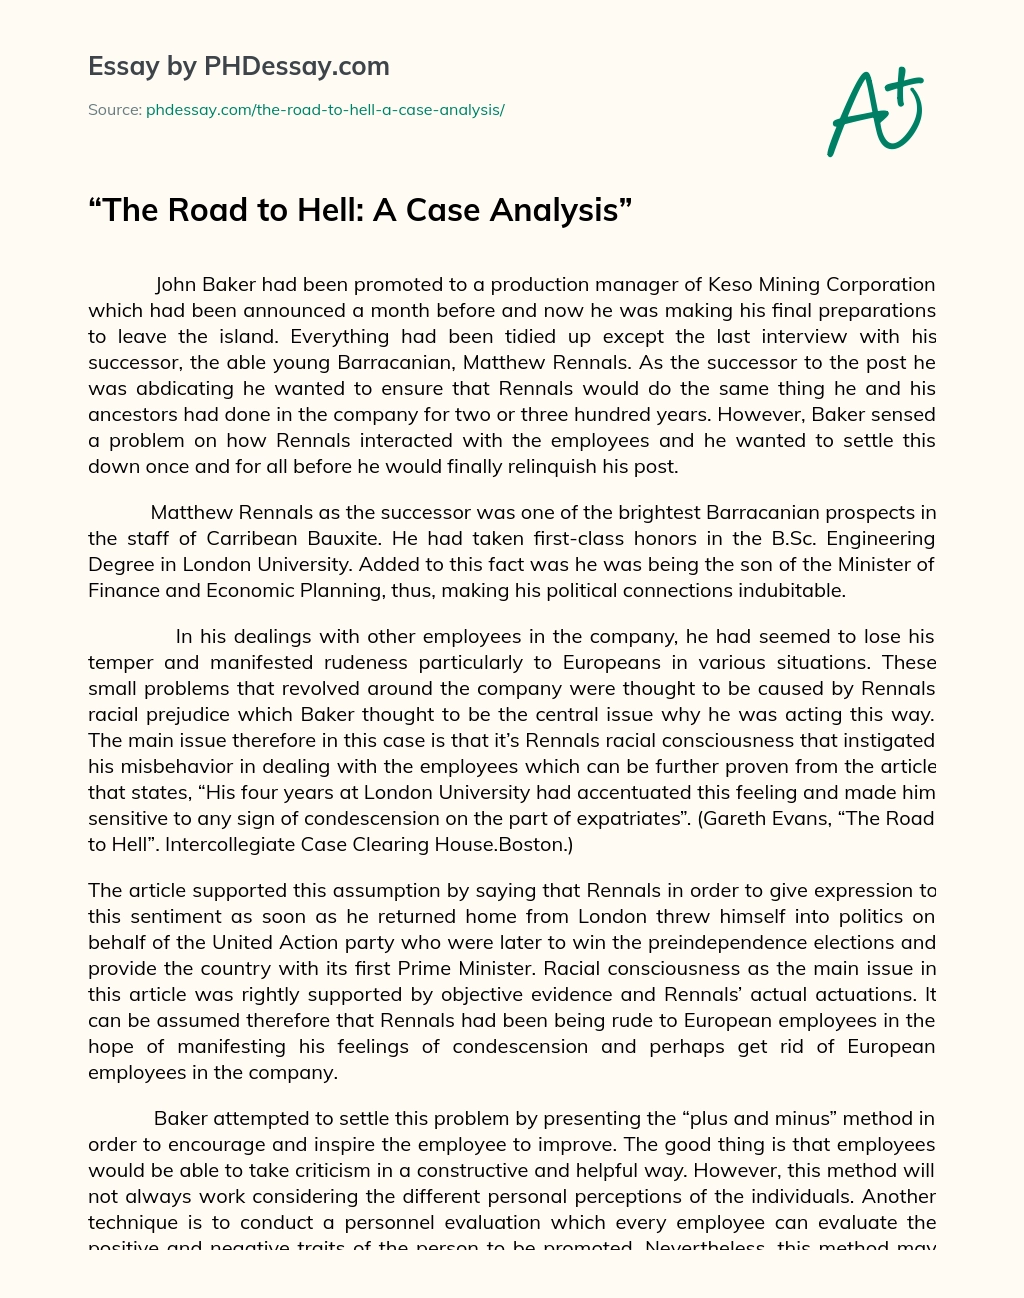 The Road to Hell: A Case Analysis essay